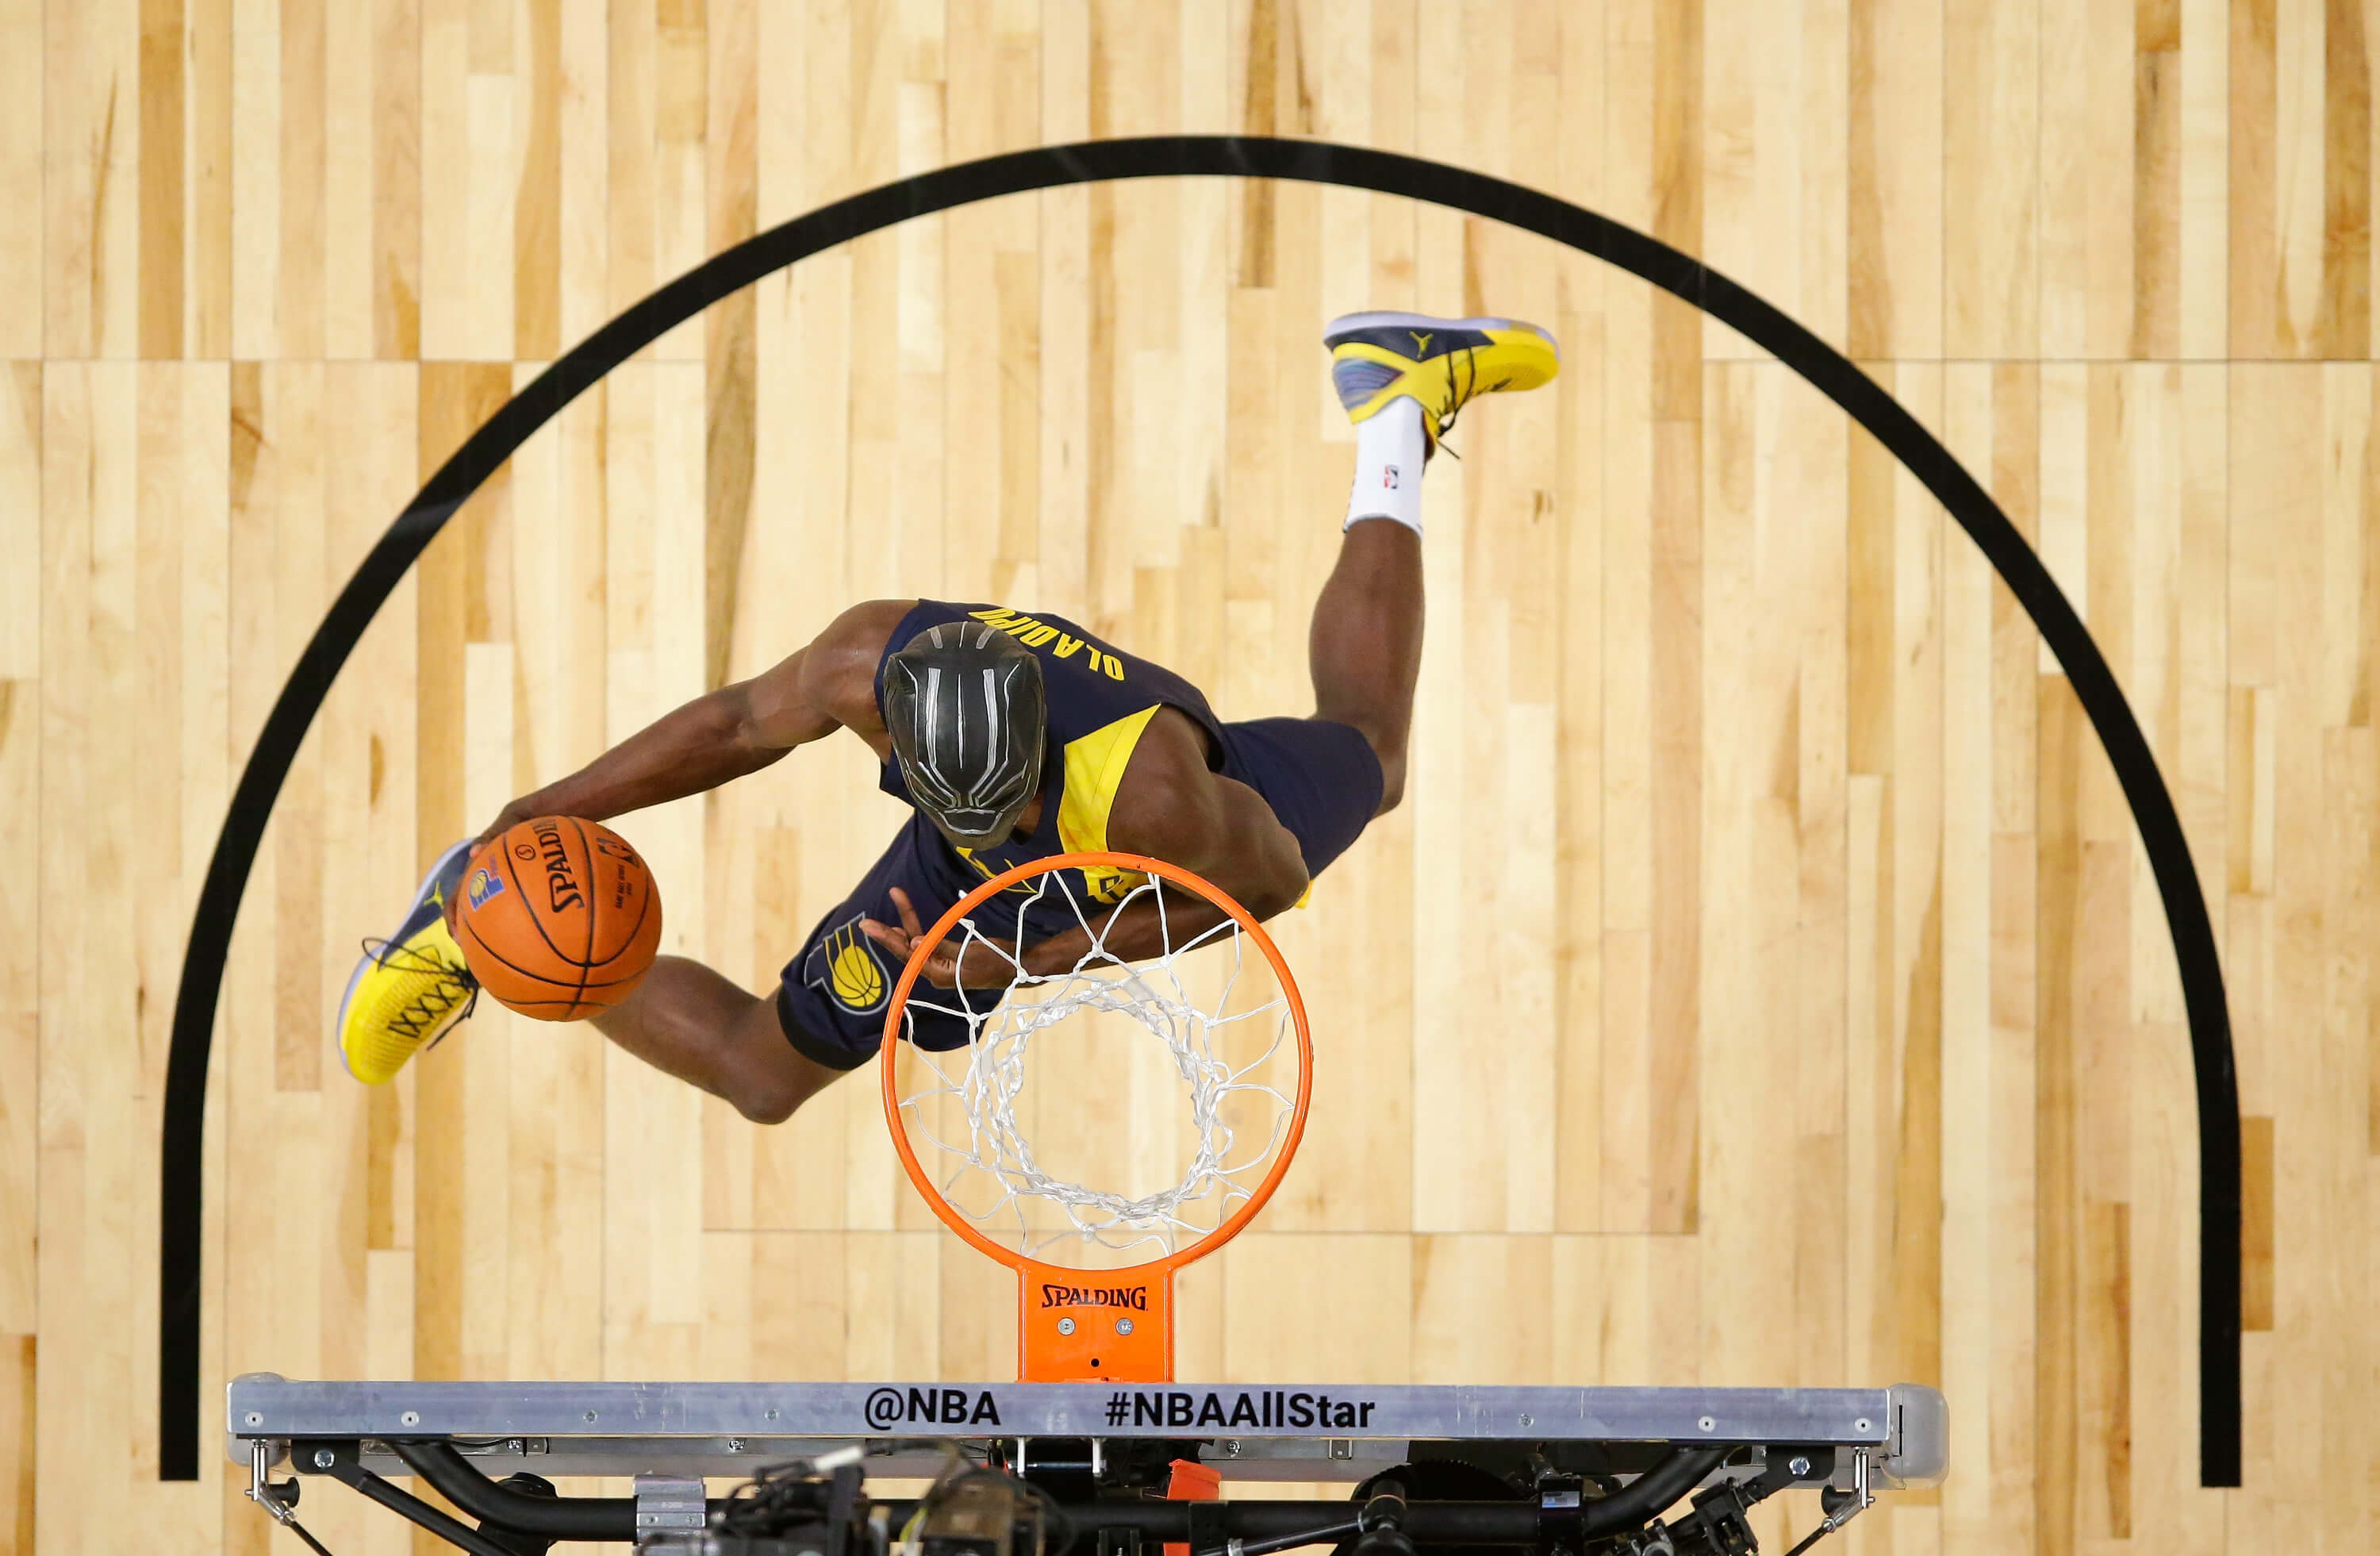 Victor Oladipo of the Indiana Pacers competes in the 2018 Verizon Slam Dunk Contest.